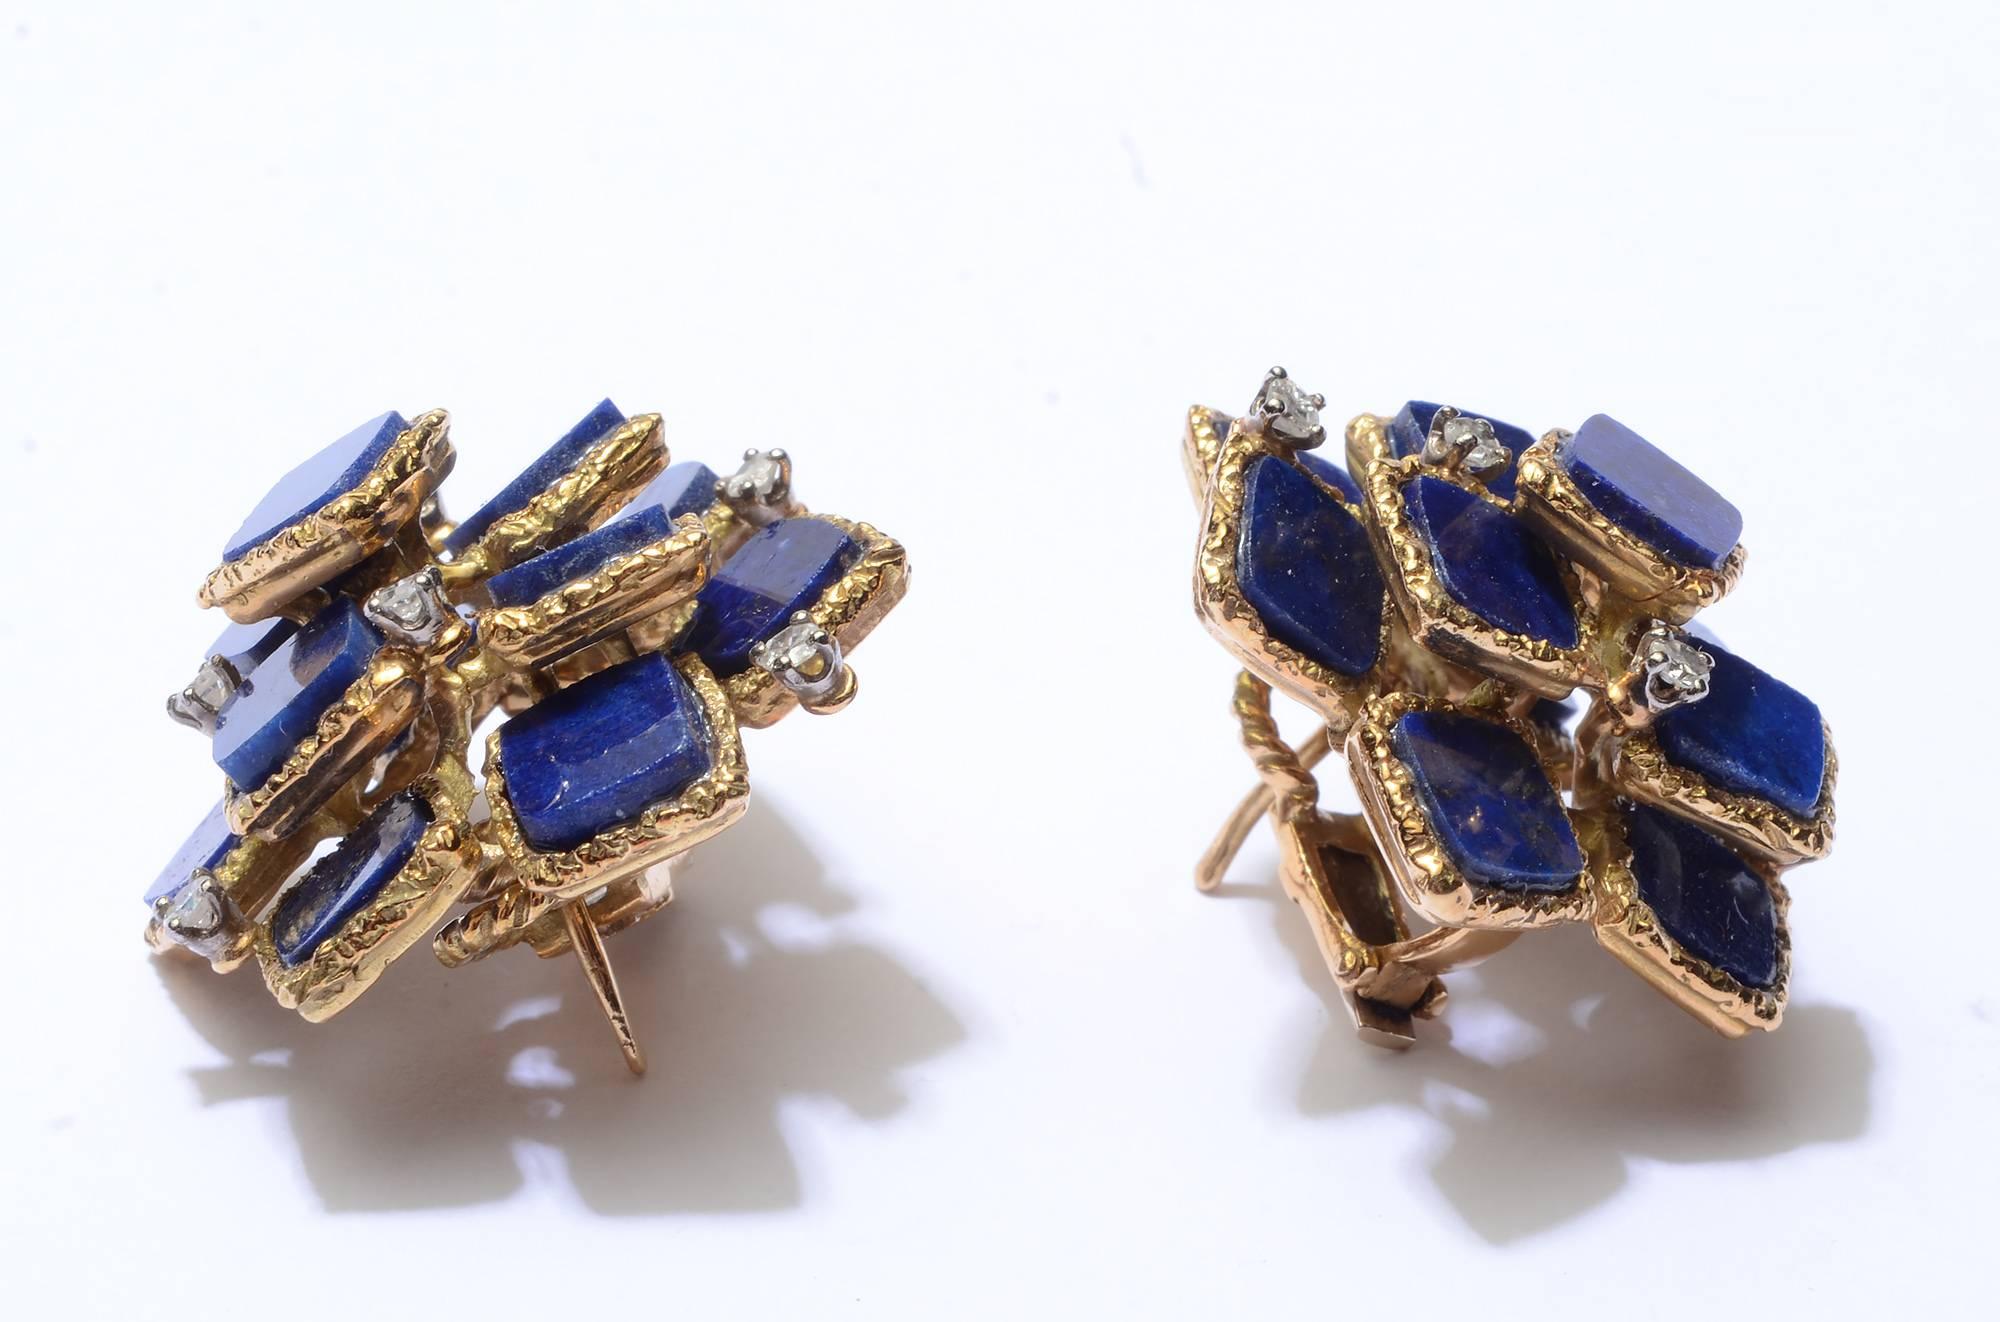 Eleven squares of lapis lazuli are set in a multi tiered arrangement in these earrings by J. Rossi. Each lapis stone is set in a textured gold band. Six diamonds weighing .05 carats each are set in each earring. Backs are posts and clips.
Matching